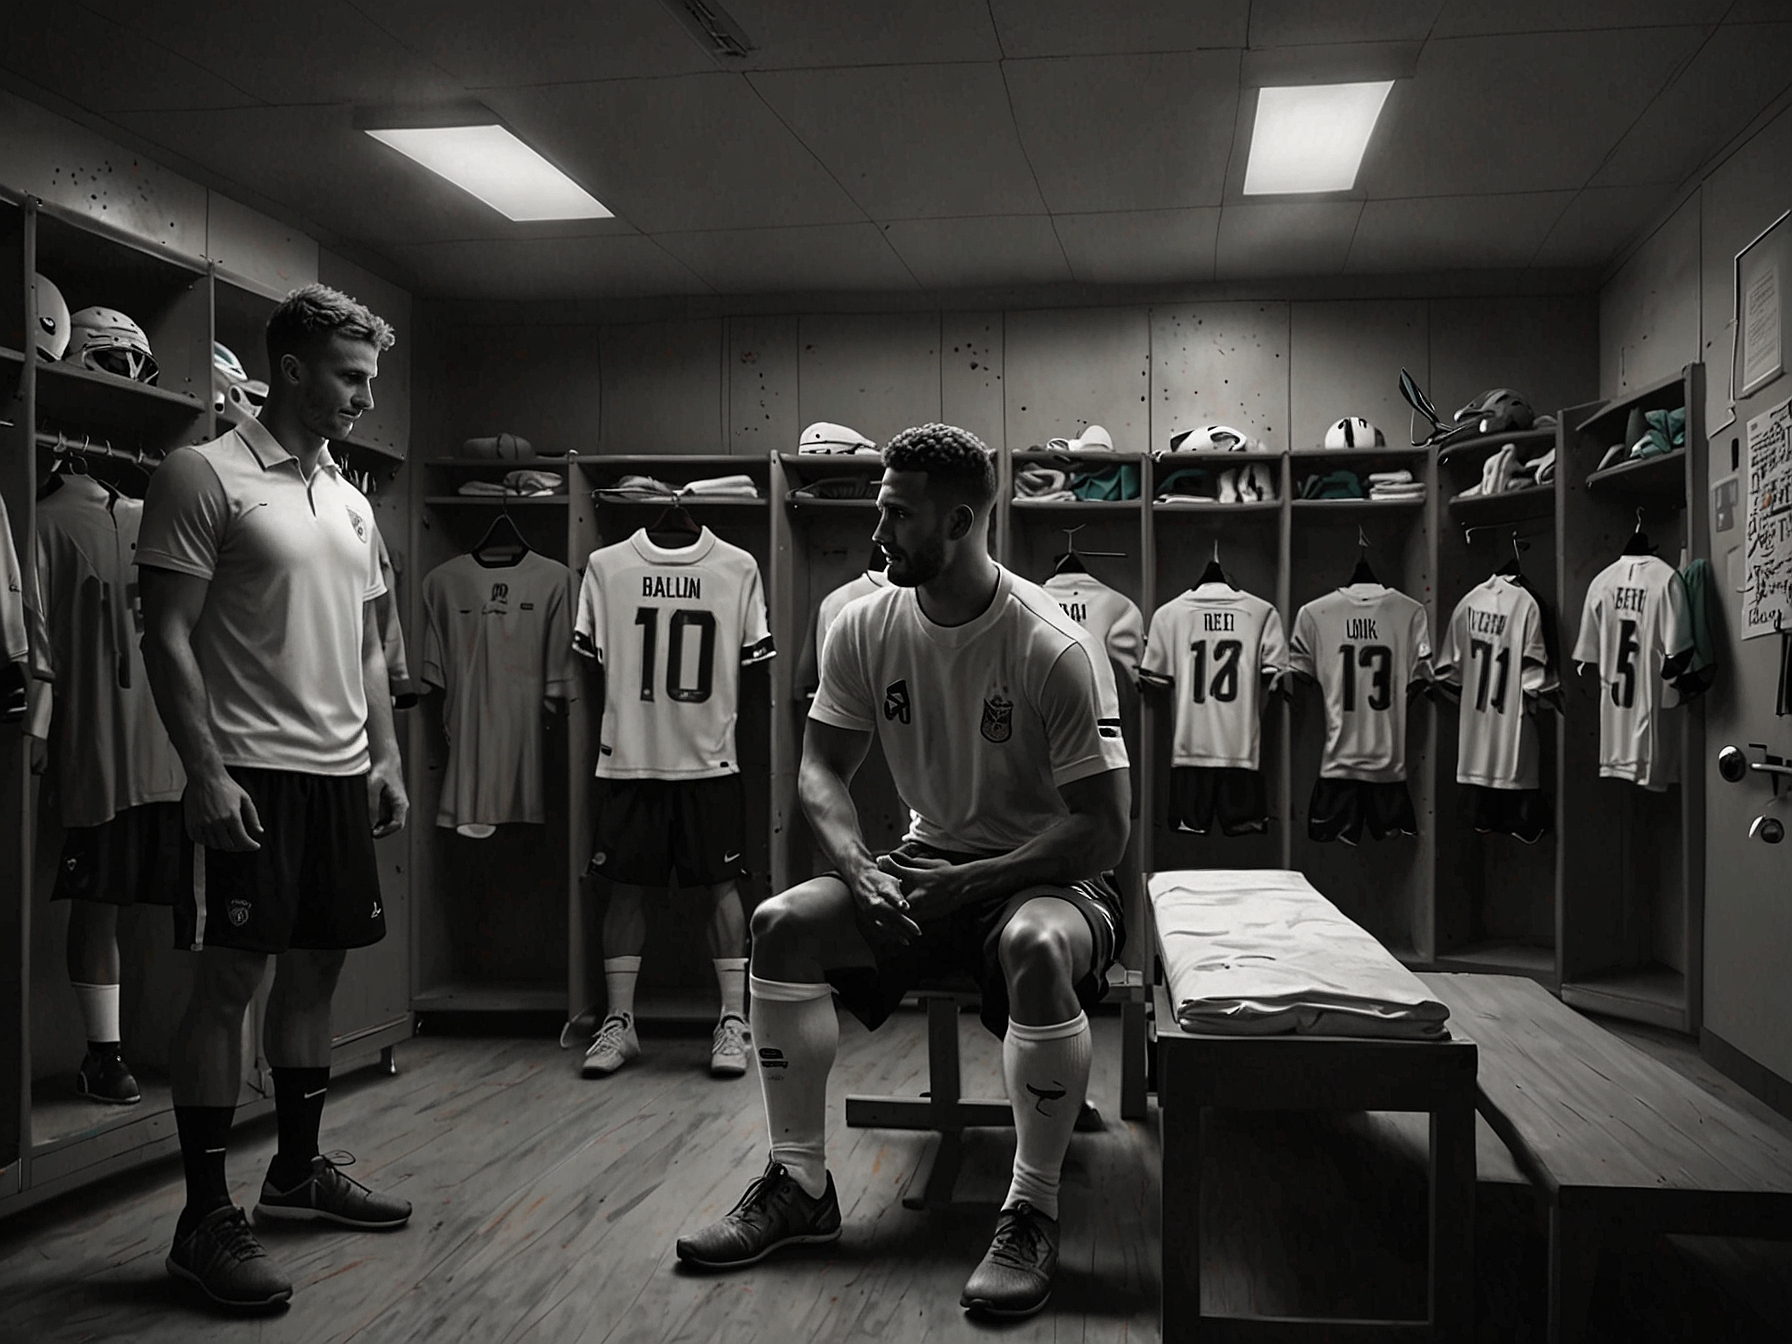 In a locker room, the footballer is surrounded by teammates and coaches, all congratulating him, highlighting the support system that played a pivotal role in his recovery and return.